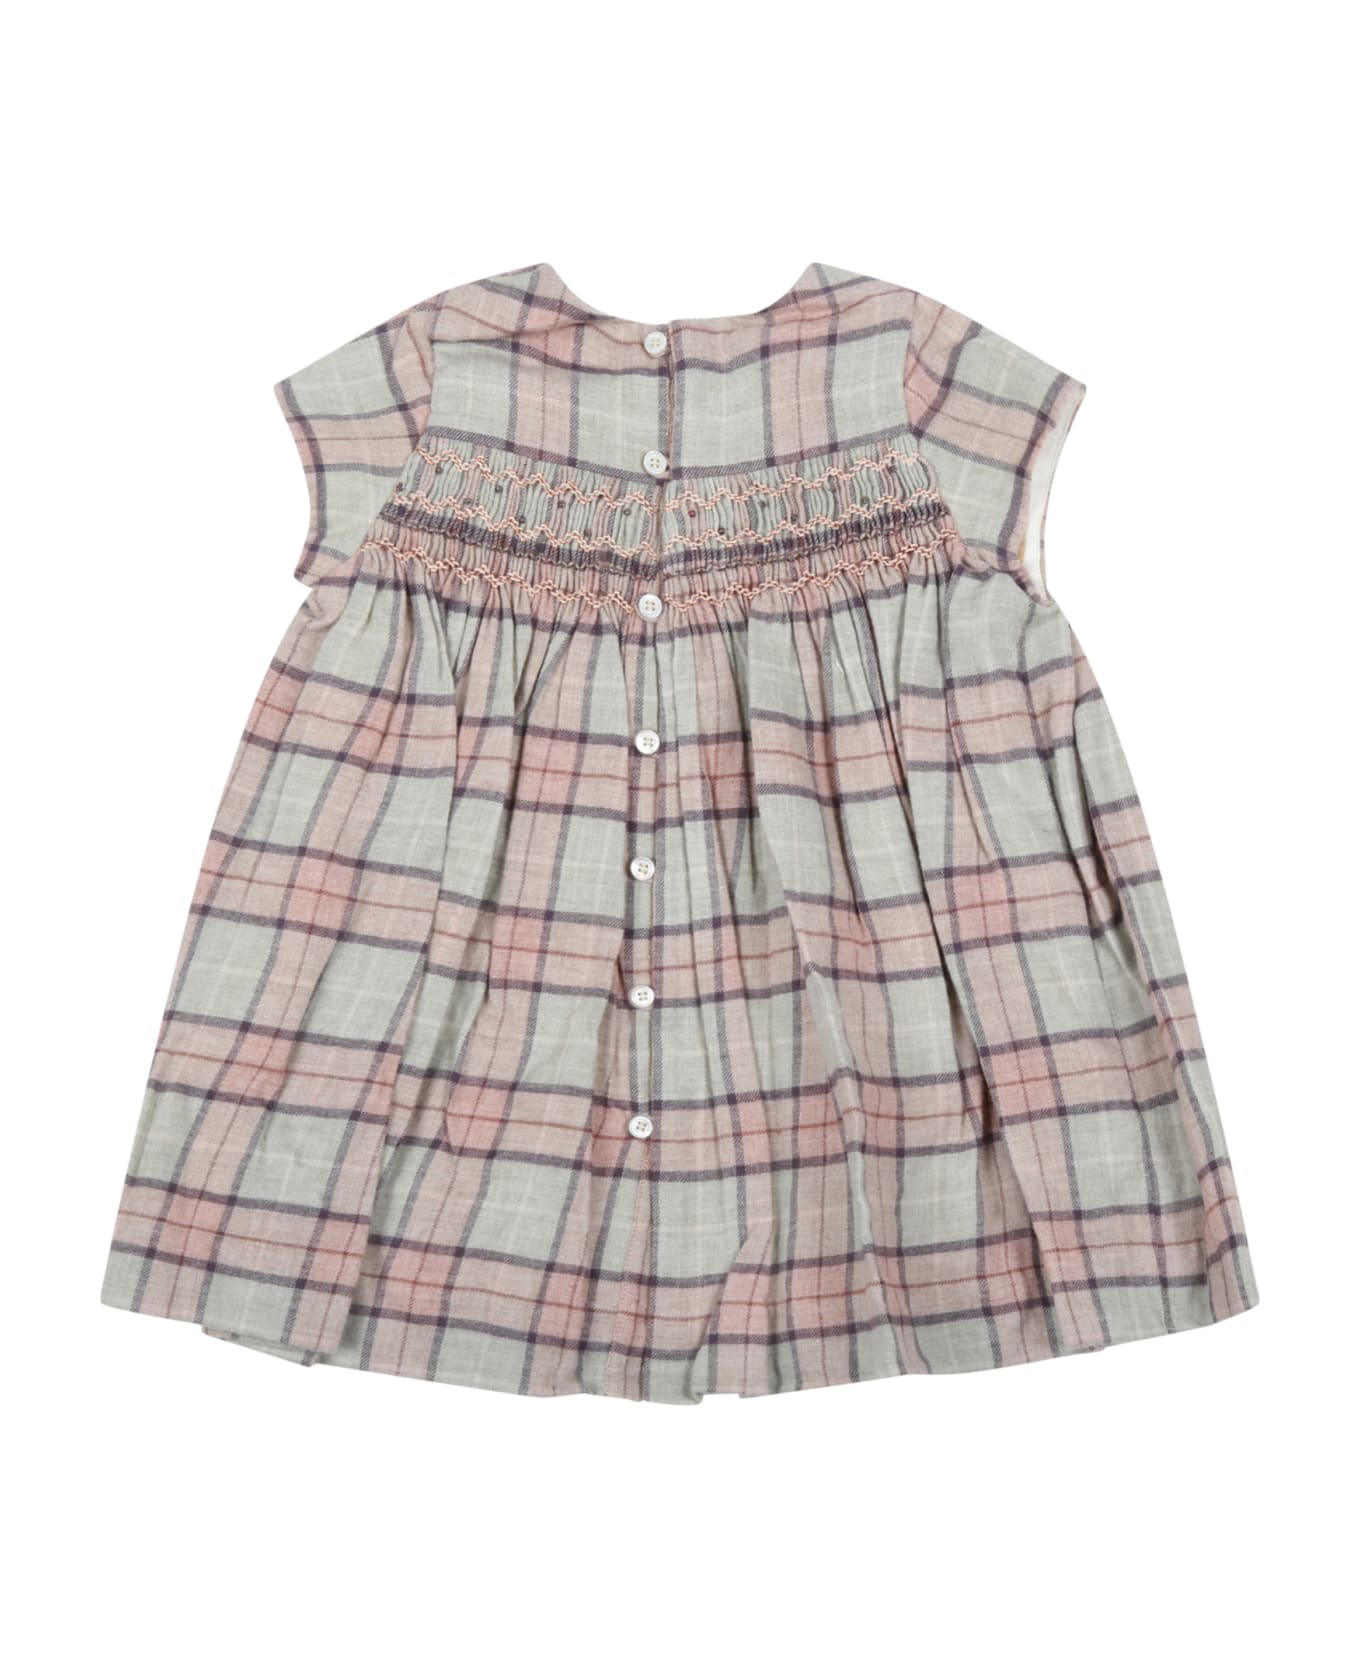 Bonpoint Multicolor Dress For Baby Girl With Embroidery - Multicolor